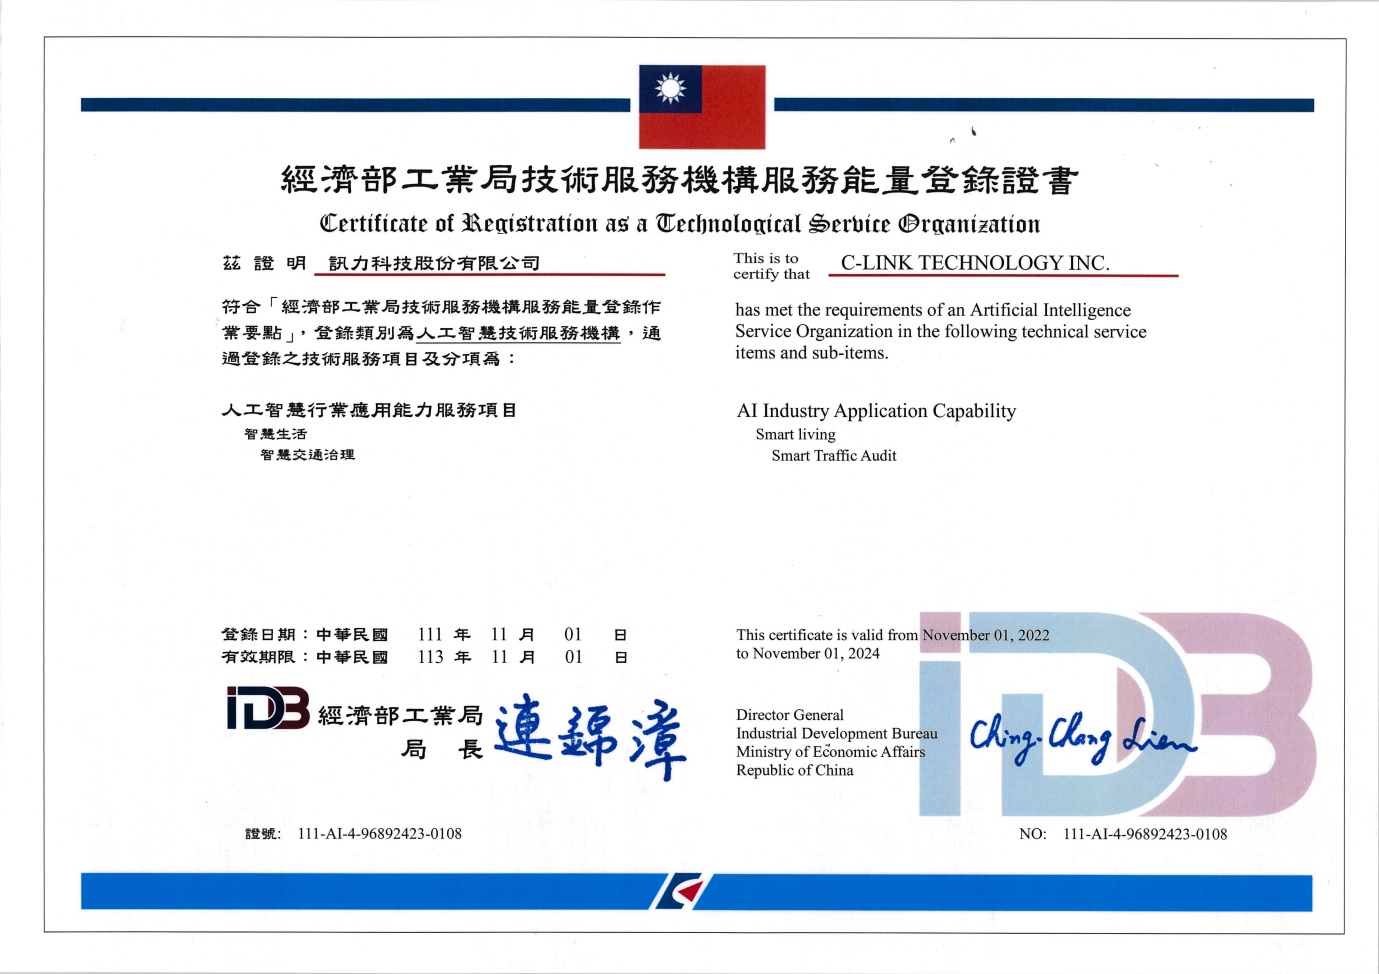 C-Link has obtained the energy registration certification of the "Artificial Intelligence Industry Application Capability " of the Industrial development bureau, ministry of economic affairs